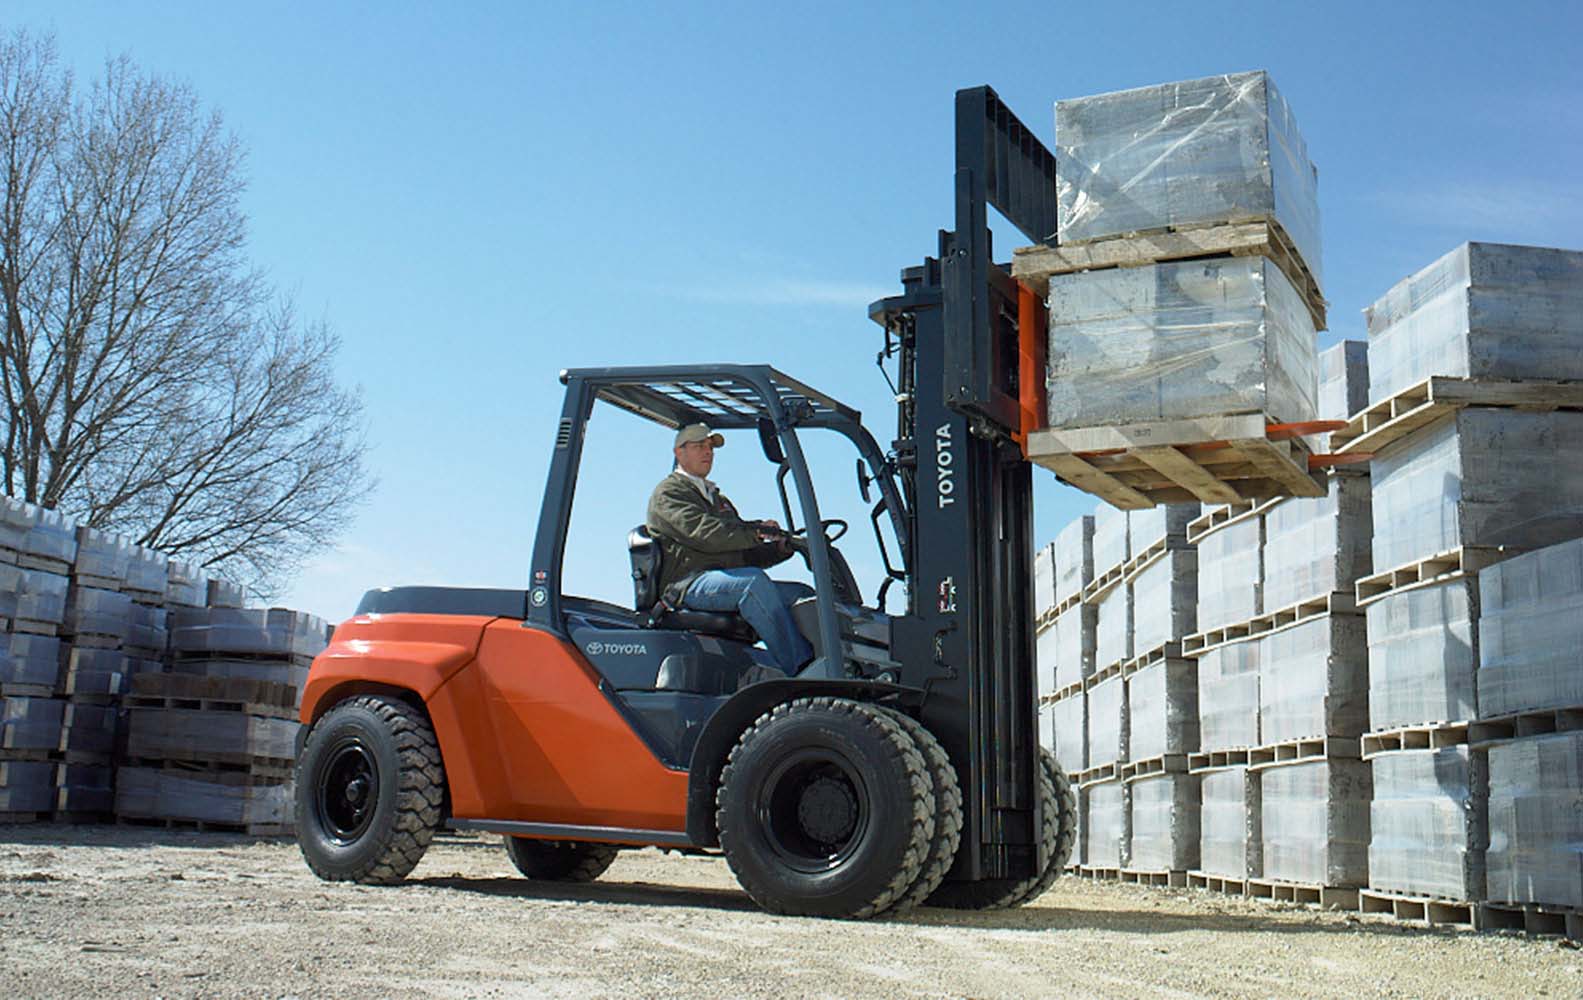 Forklifts Overheating: Causes And Prevention While Moving Heavy Objects